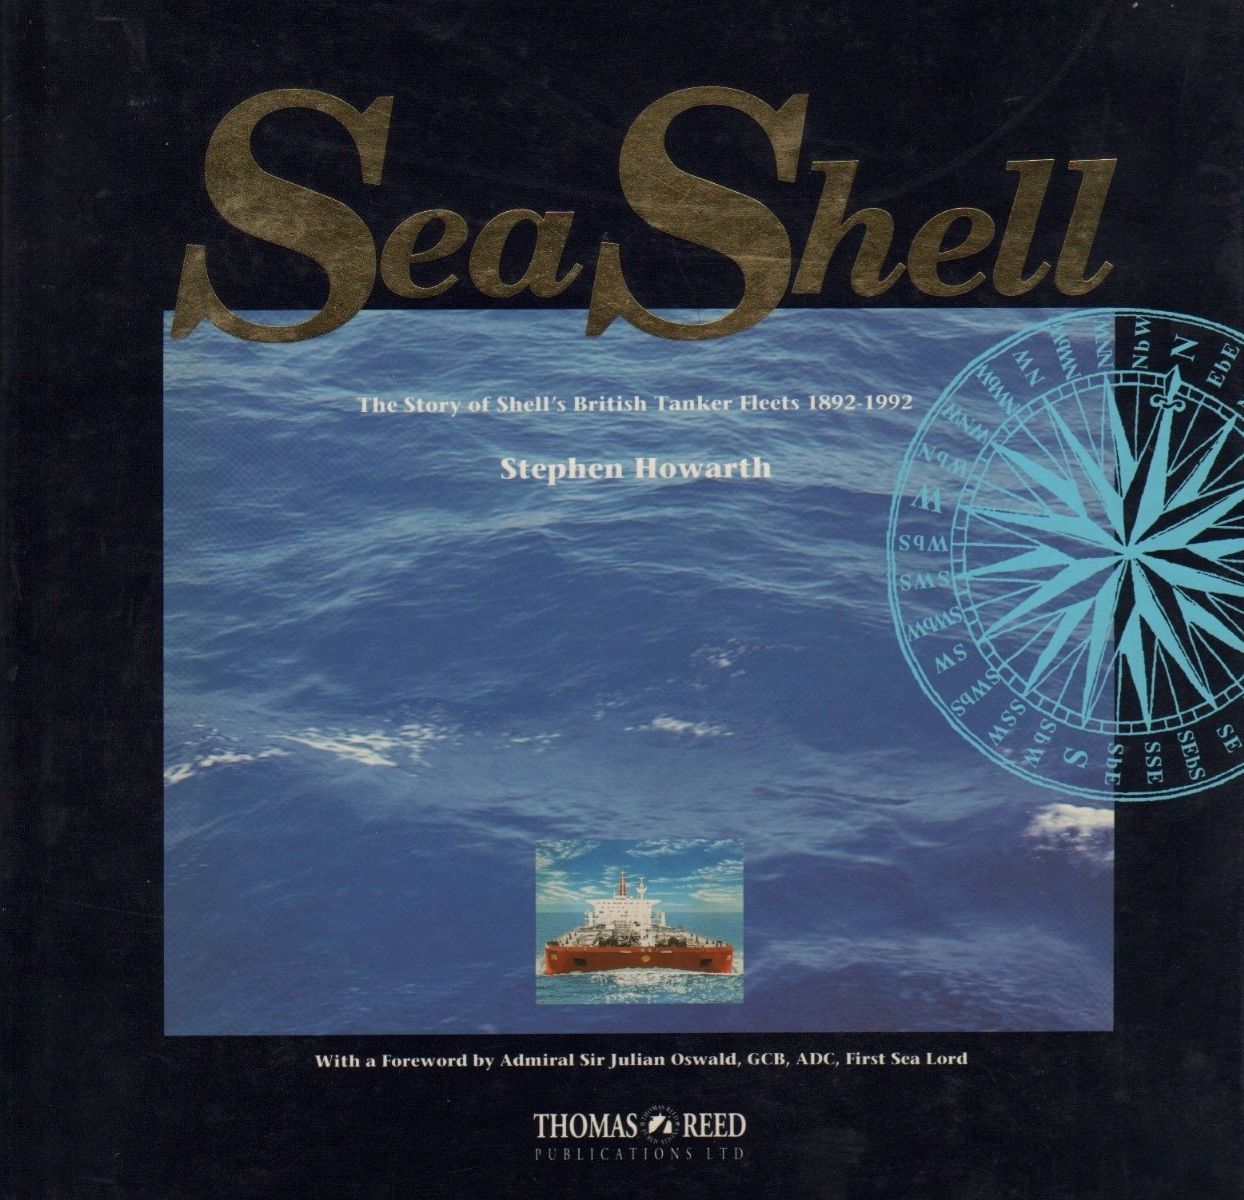 SEA SHELL: The Story of Shell's British Tanker Fleets 1892-1992